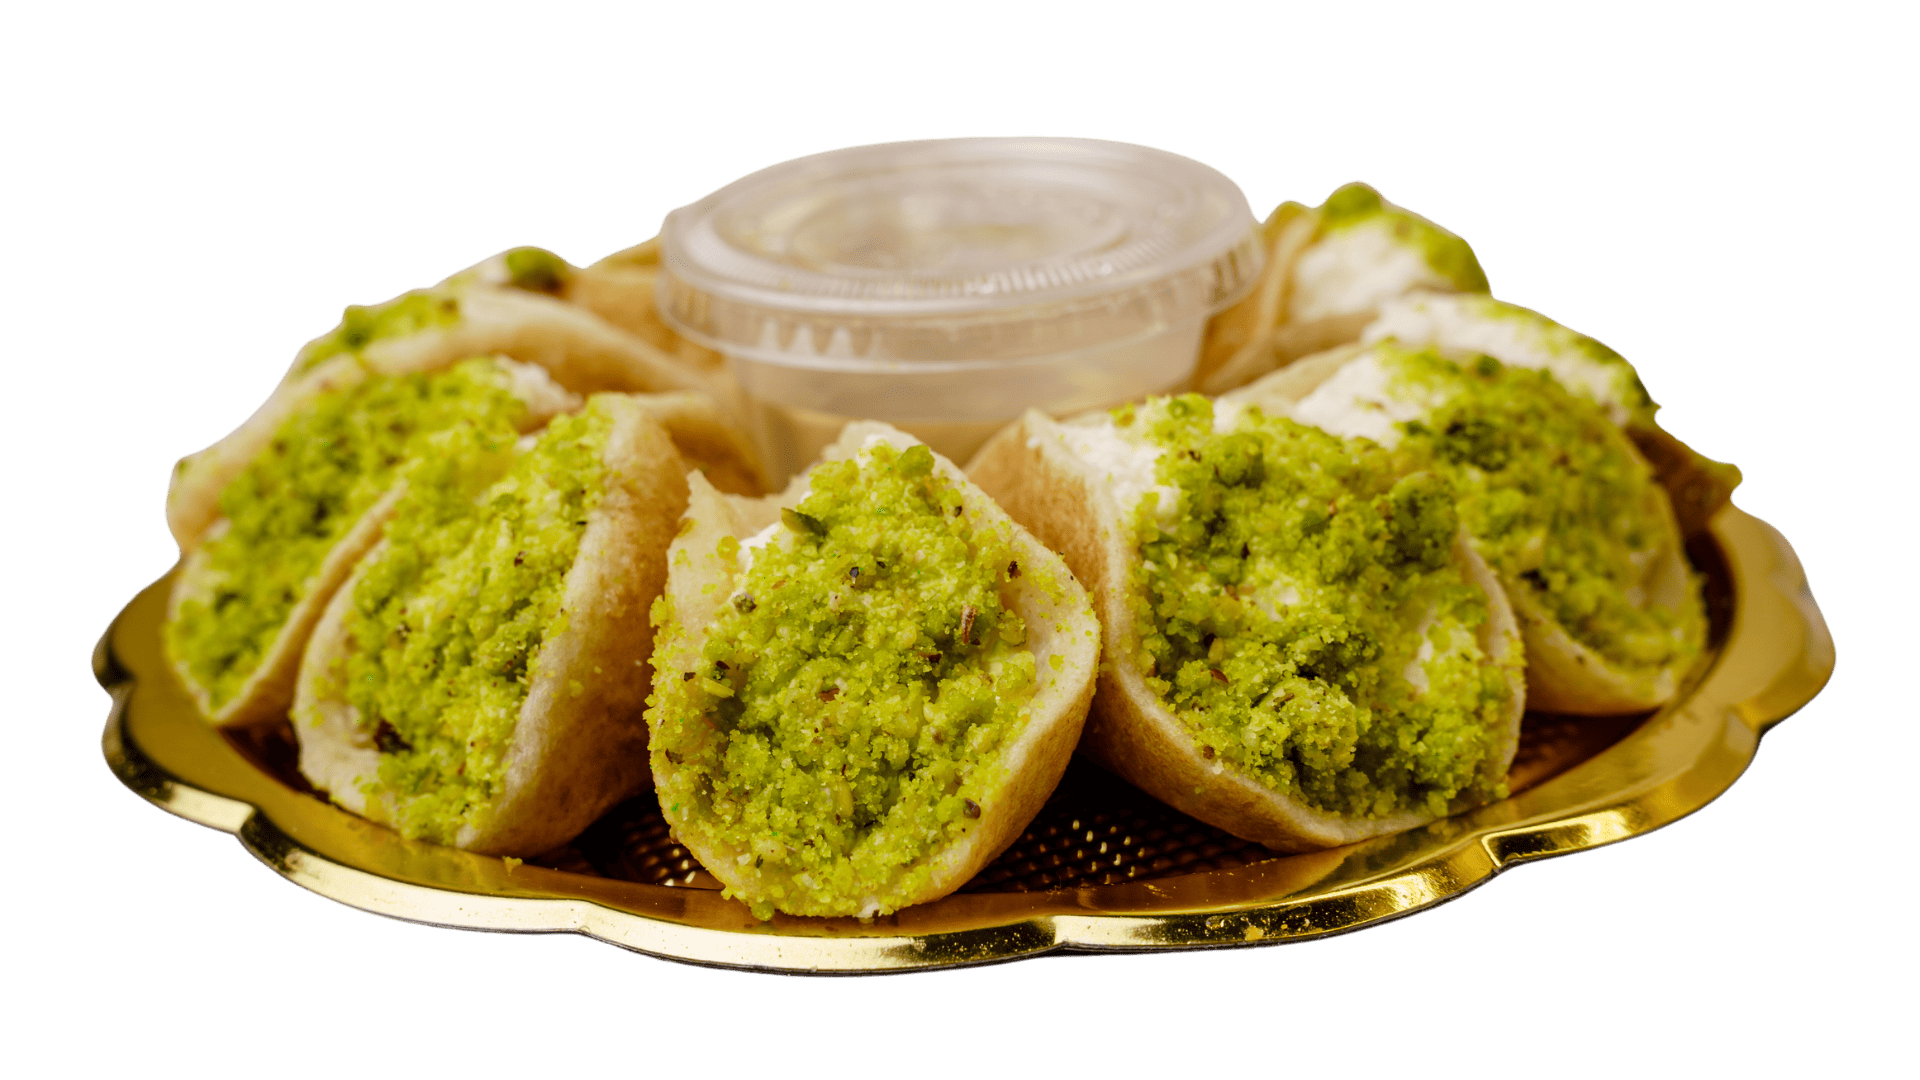 A tray of Qatayef Assafiri pastries by Pâtisserie Le Caramel with green sauce on it, available in Ottawa, Ontario.